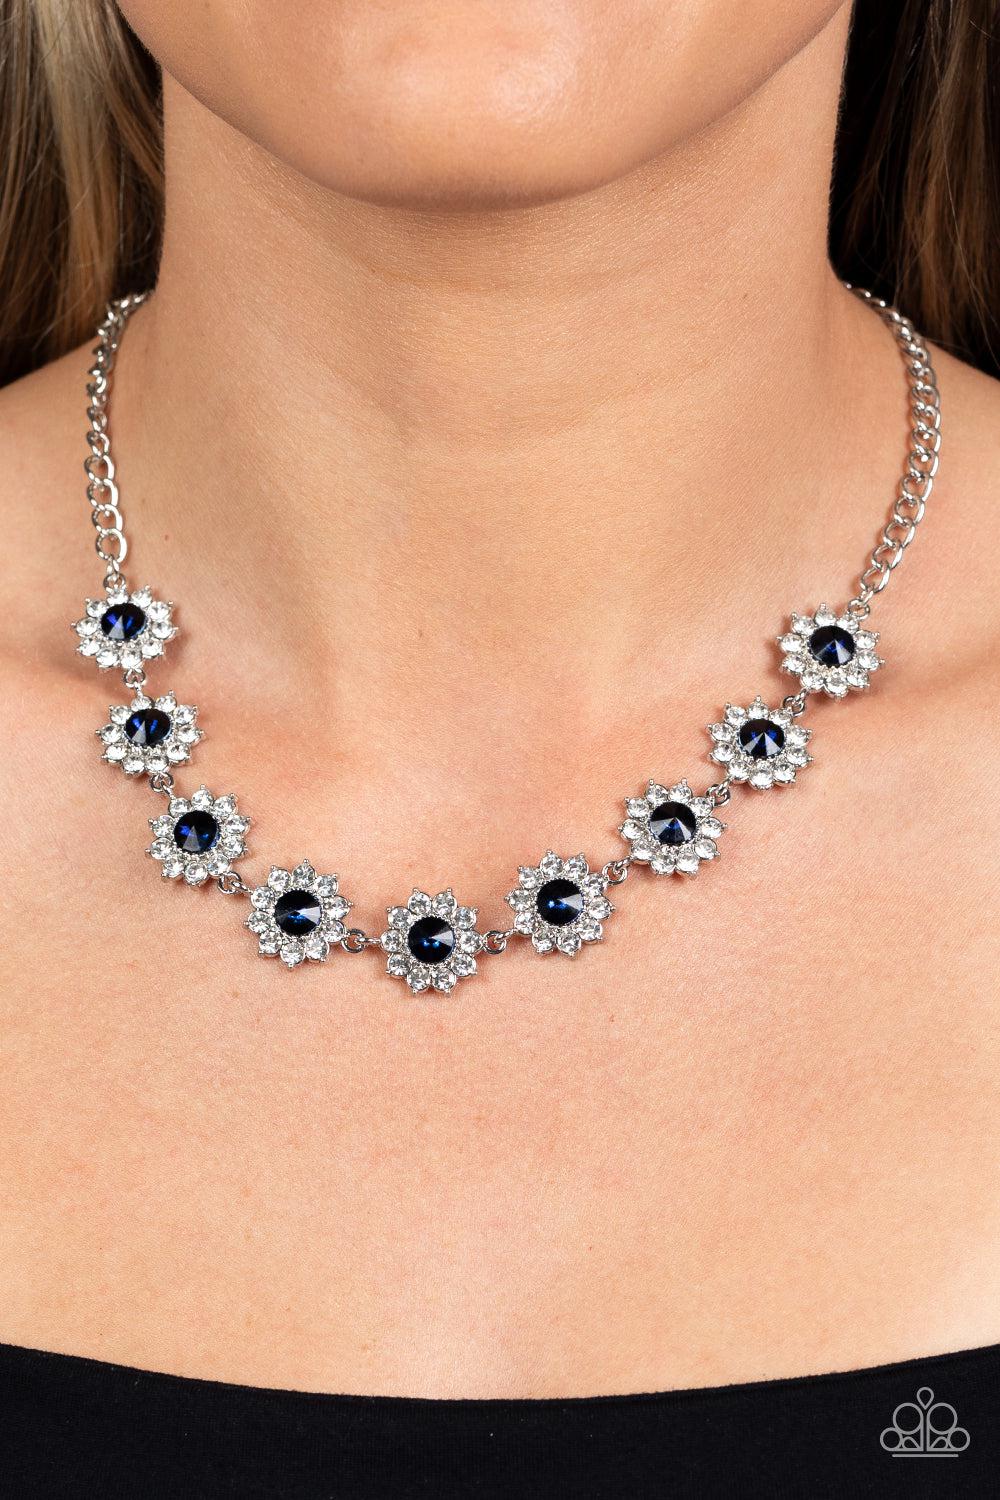 Blooming Brilliance Blue Rhinestone Necklace - Paparazzi Accessories- lightbox - CarasShop.com - $5 Jewelry by Cara Jewels